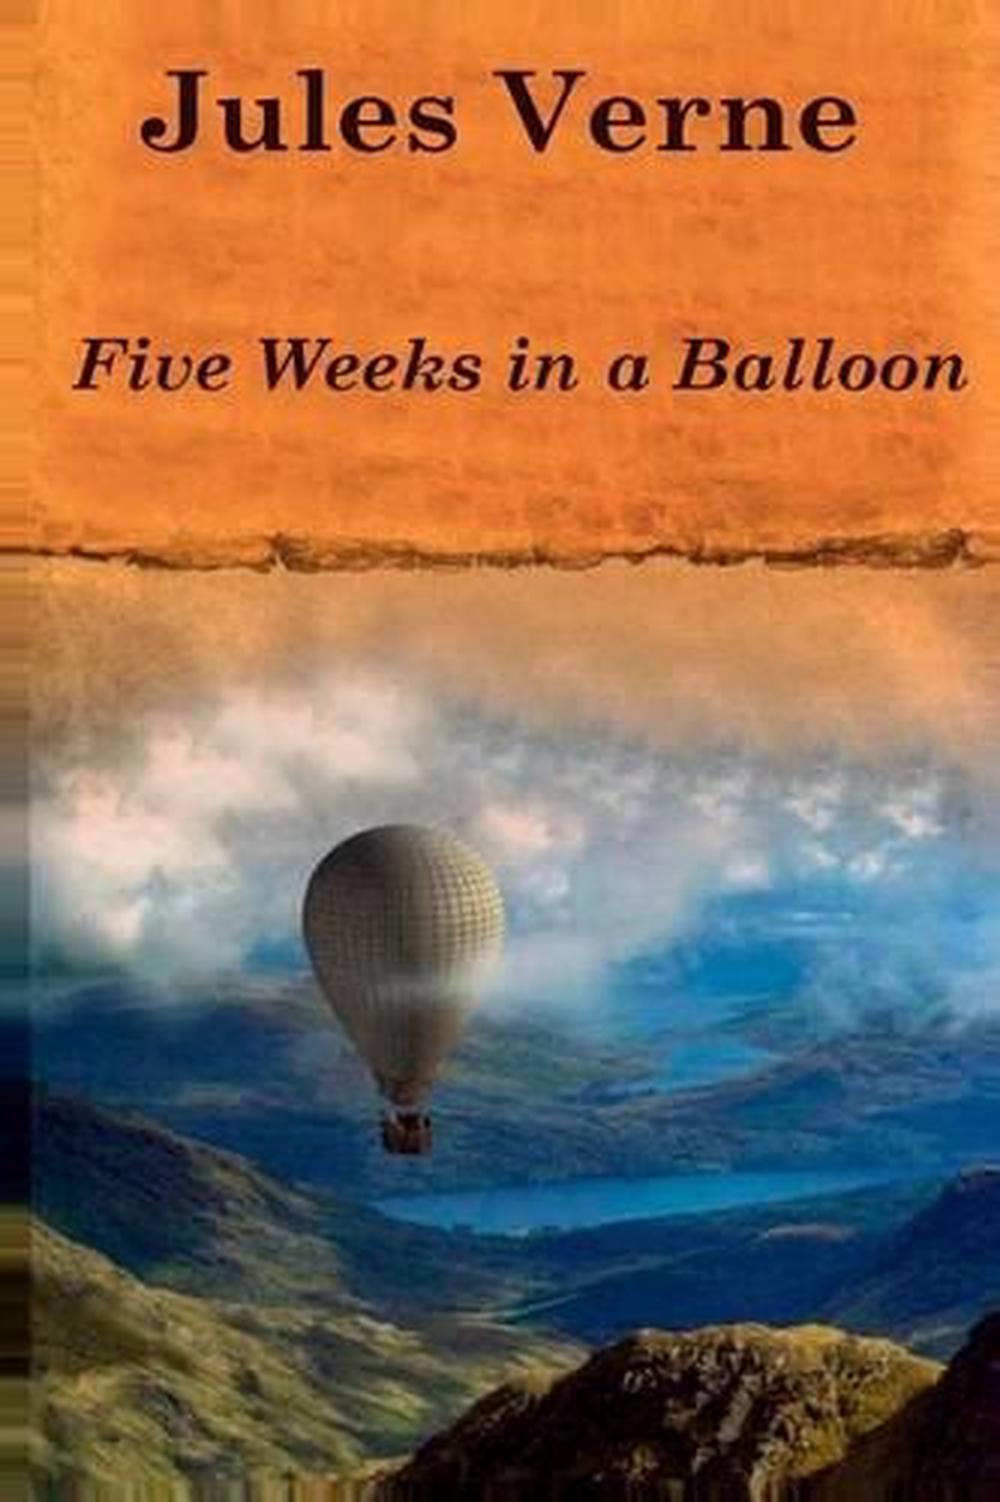 five weeks in a balloon by jules verne